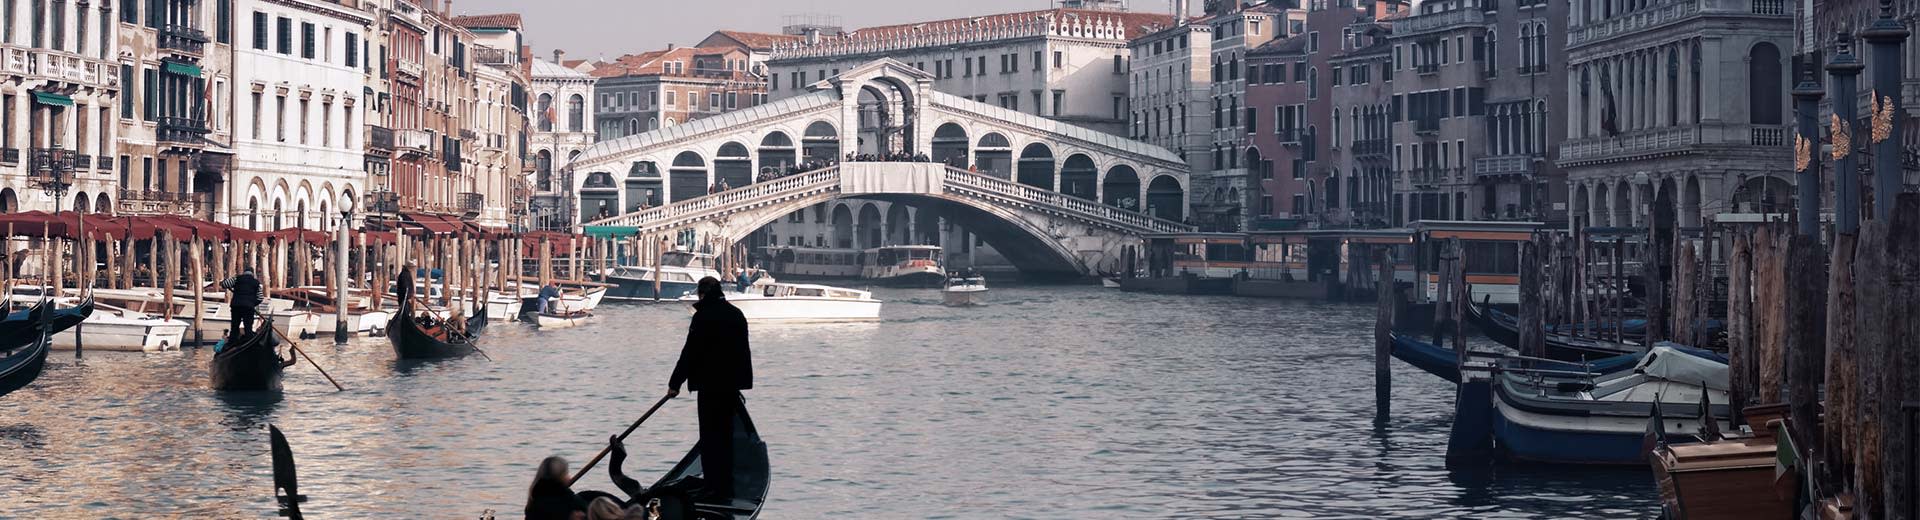 The waterways of Venice are full of Gondolas and their passengers, while in the background lies beautiful architecture